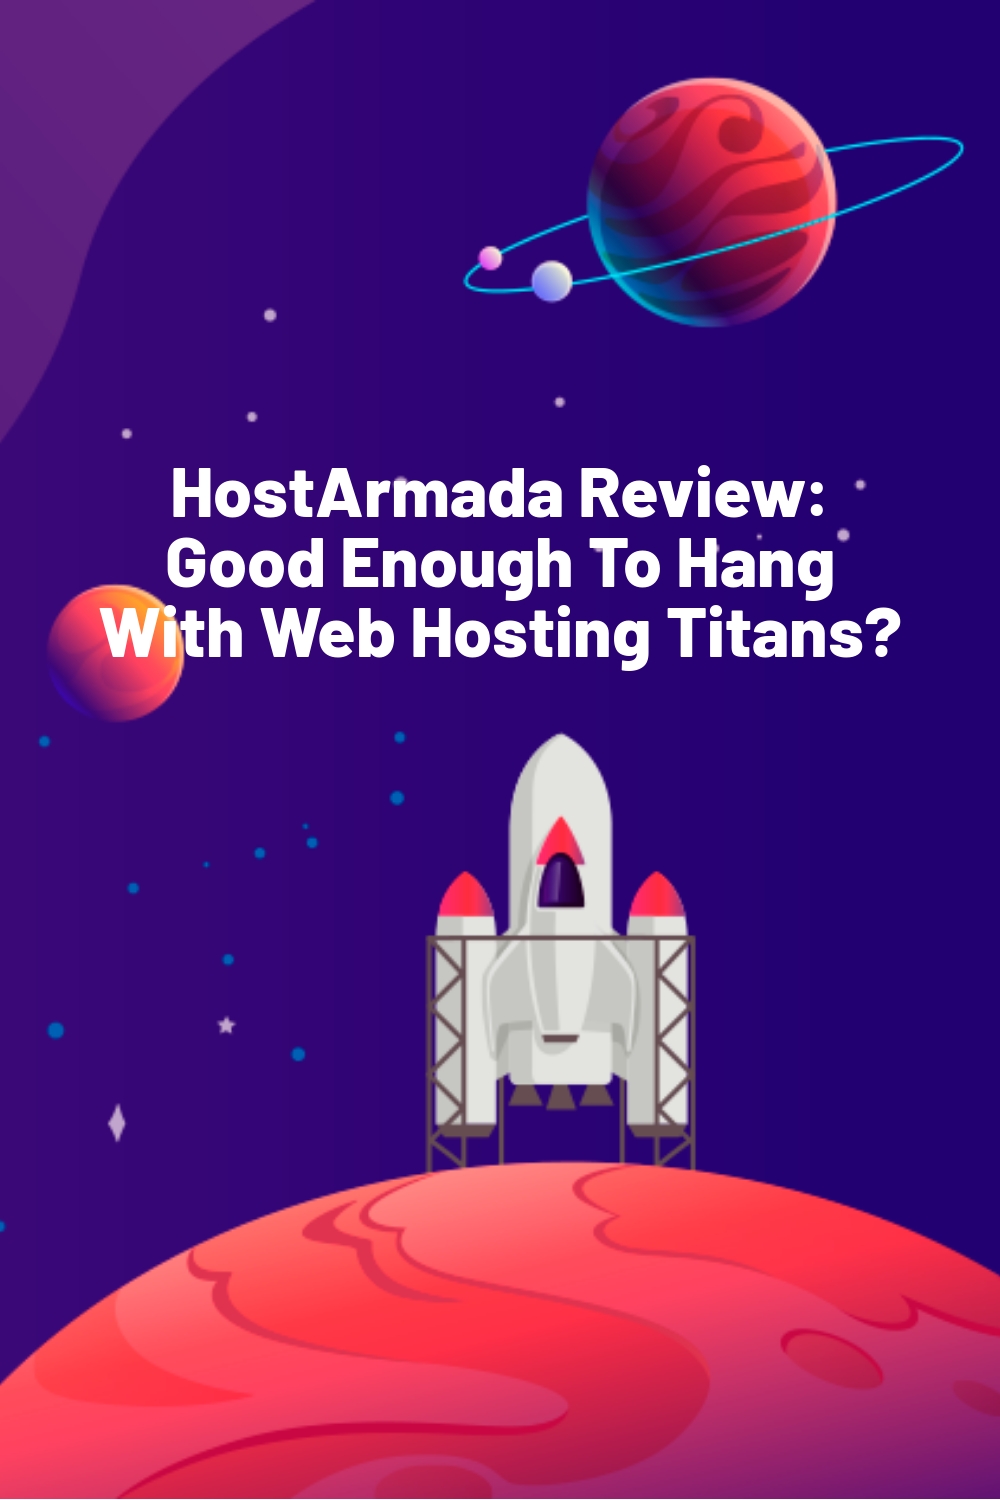 HostArmada Review: Good Enough To Hang With Web Hosting Titans?